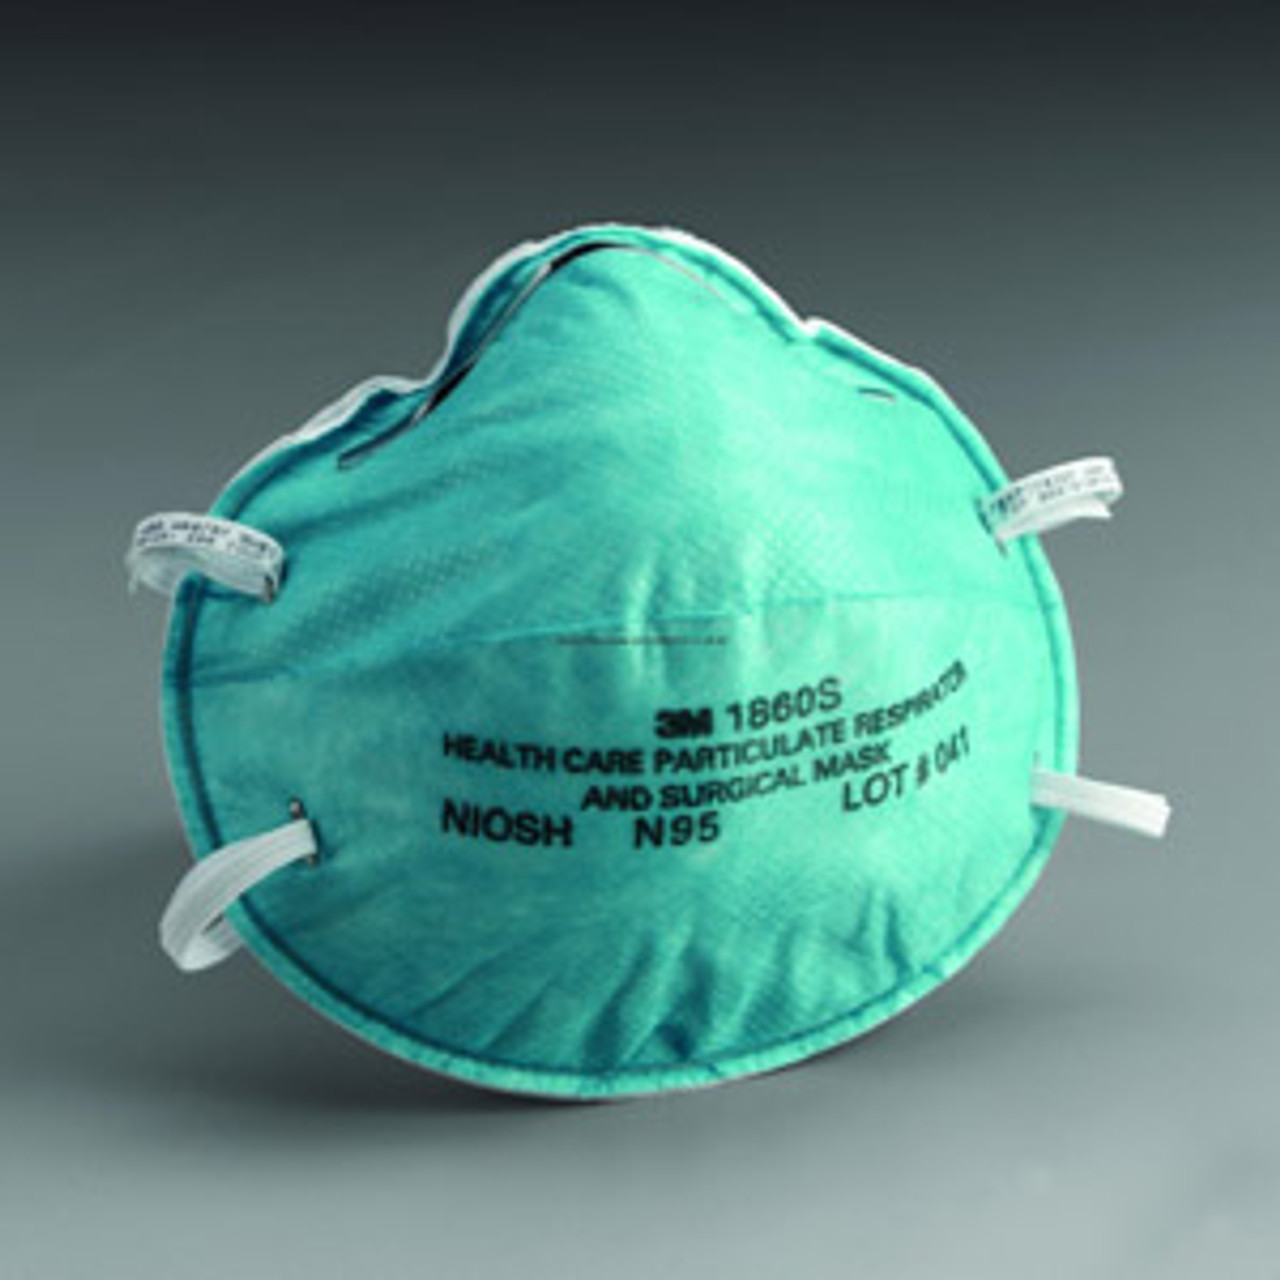 N95 Health Care Particulate Respirator and Surgical Mask MMM1860CS